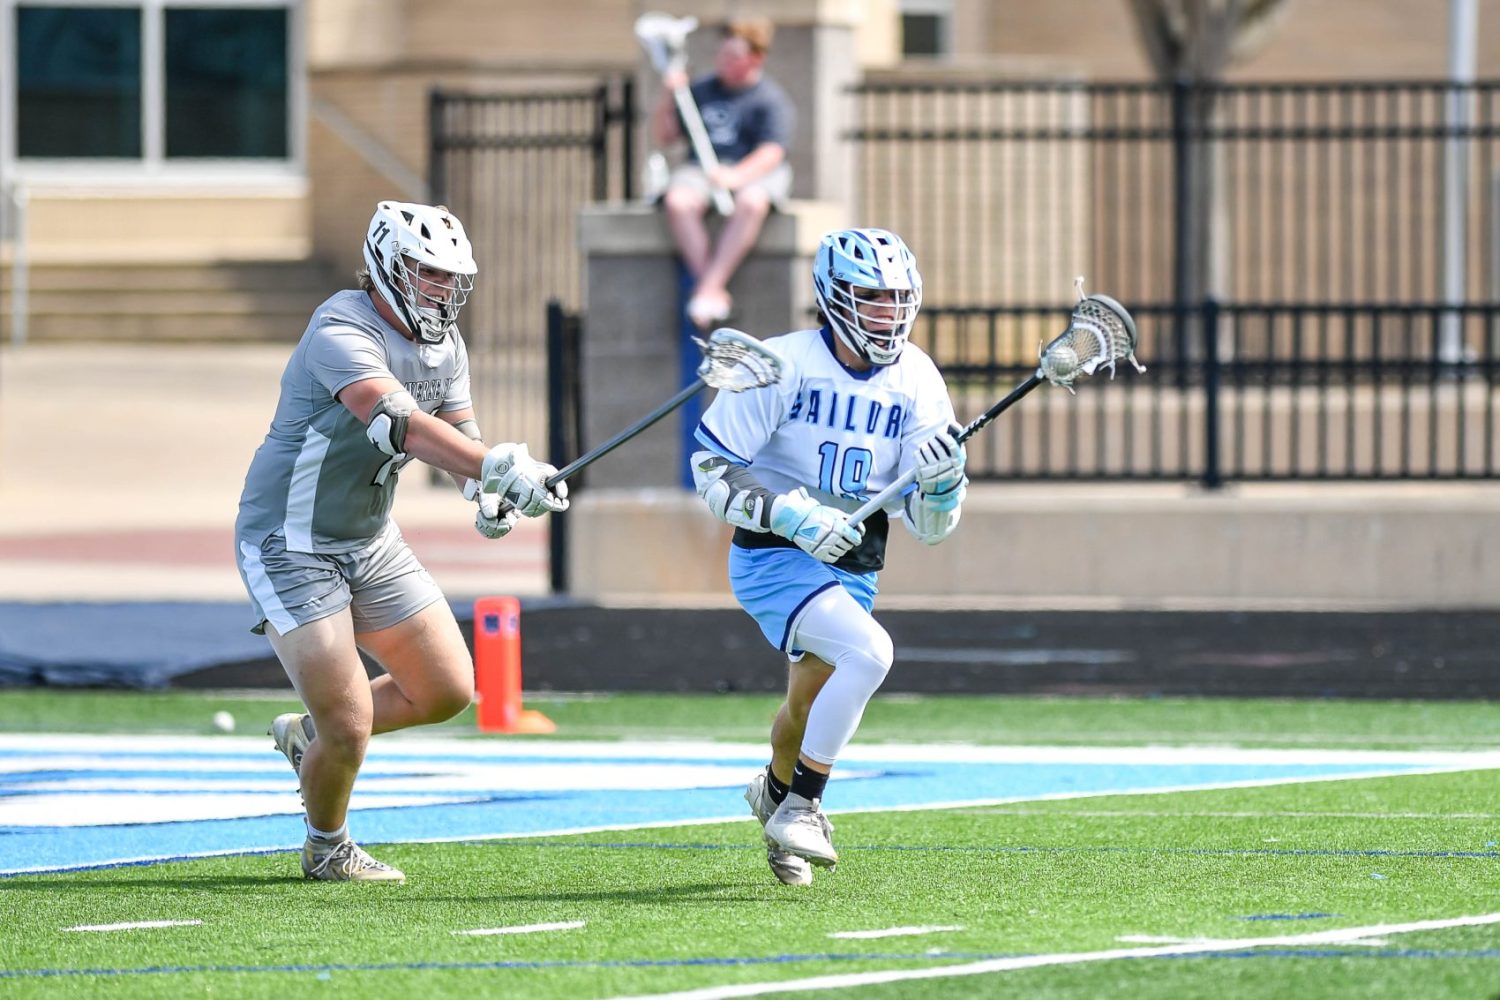 State-ranked Mona Shores posts slim lacrosse OT win over Traverse City Central